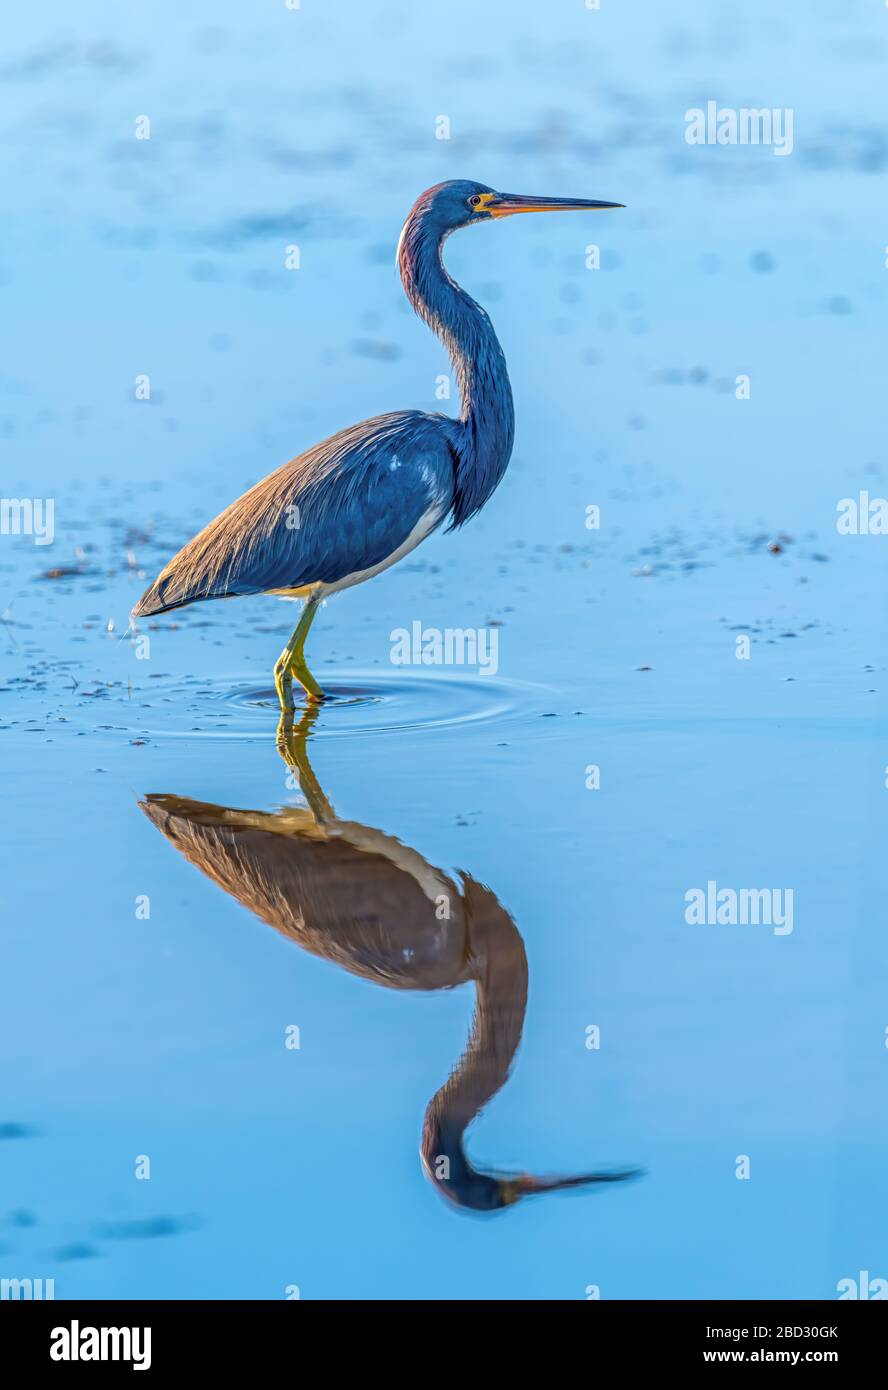 A Tricolored Heron (Egretta tricolor) wading in the water in the  Merritt Island National Wildlife Refuge, Florida, USA. Stock Photo